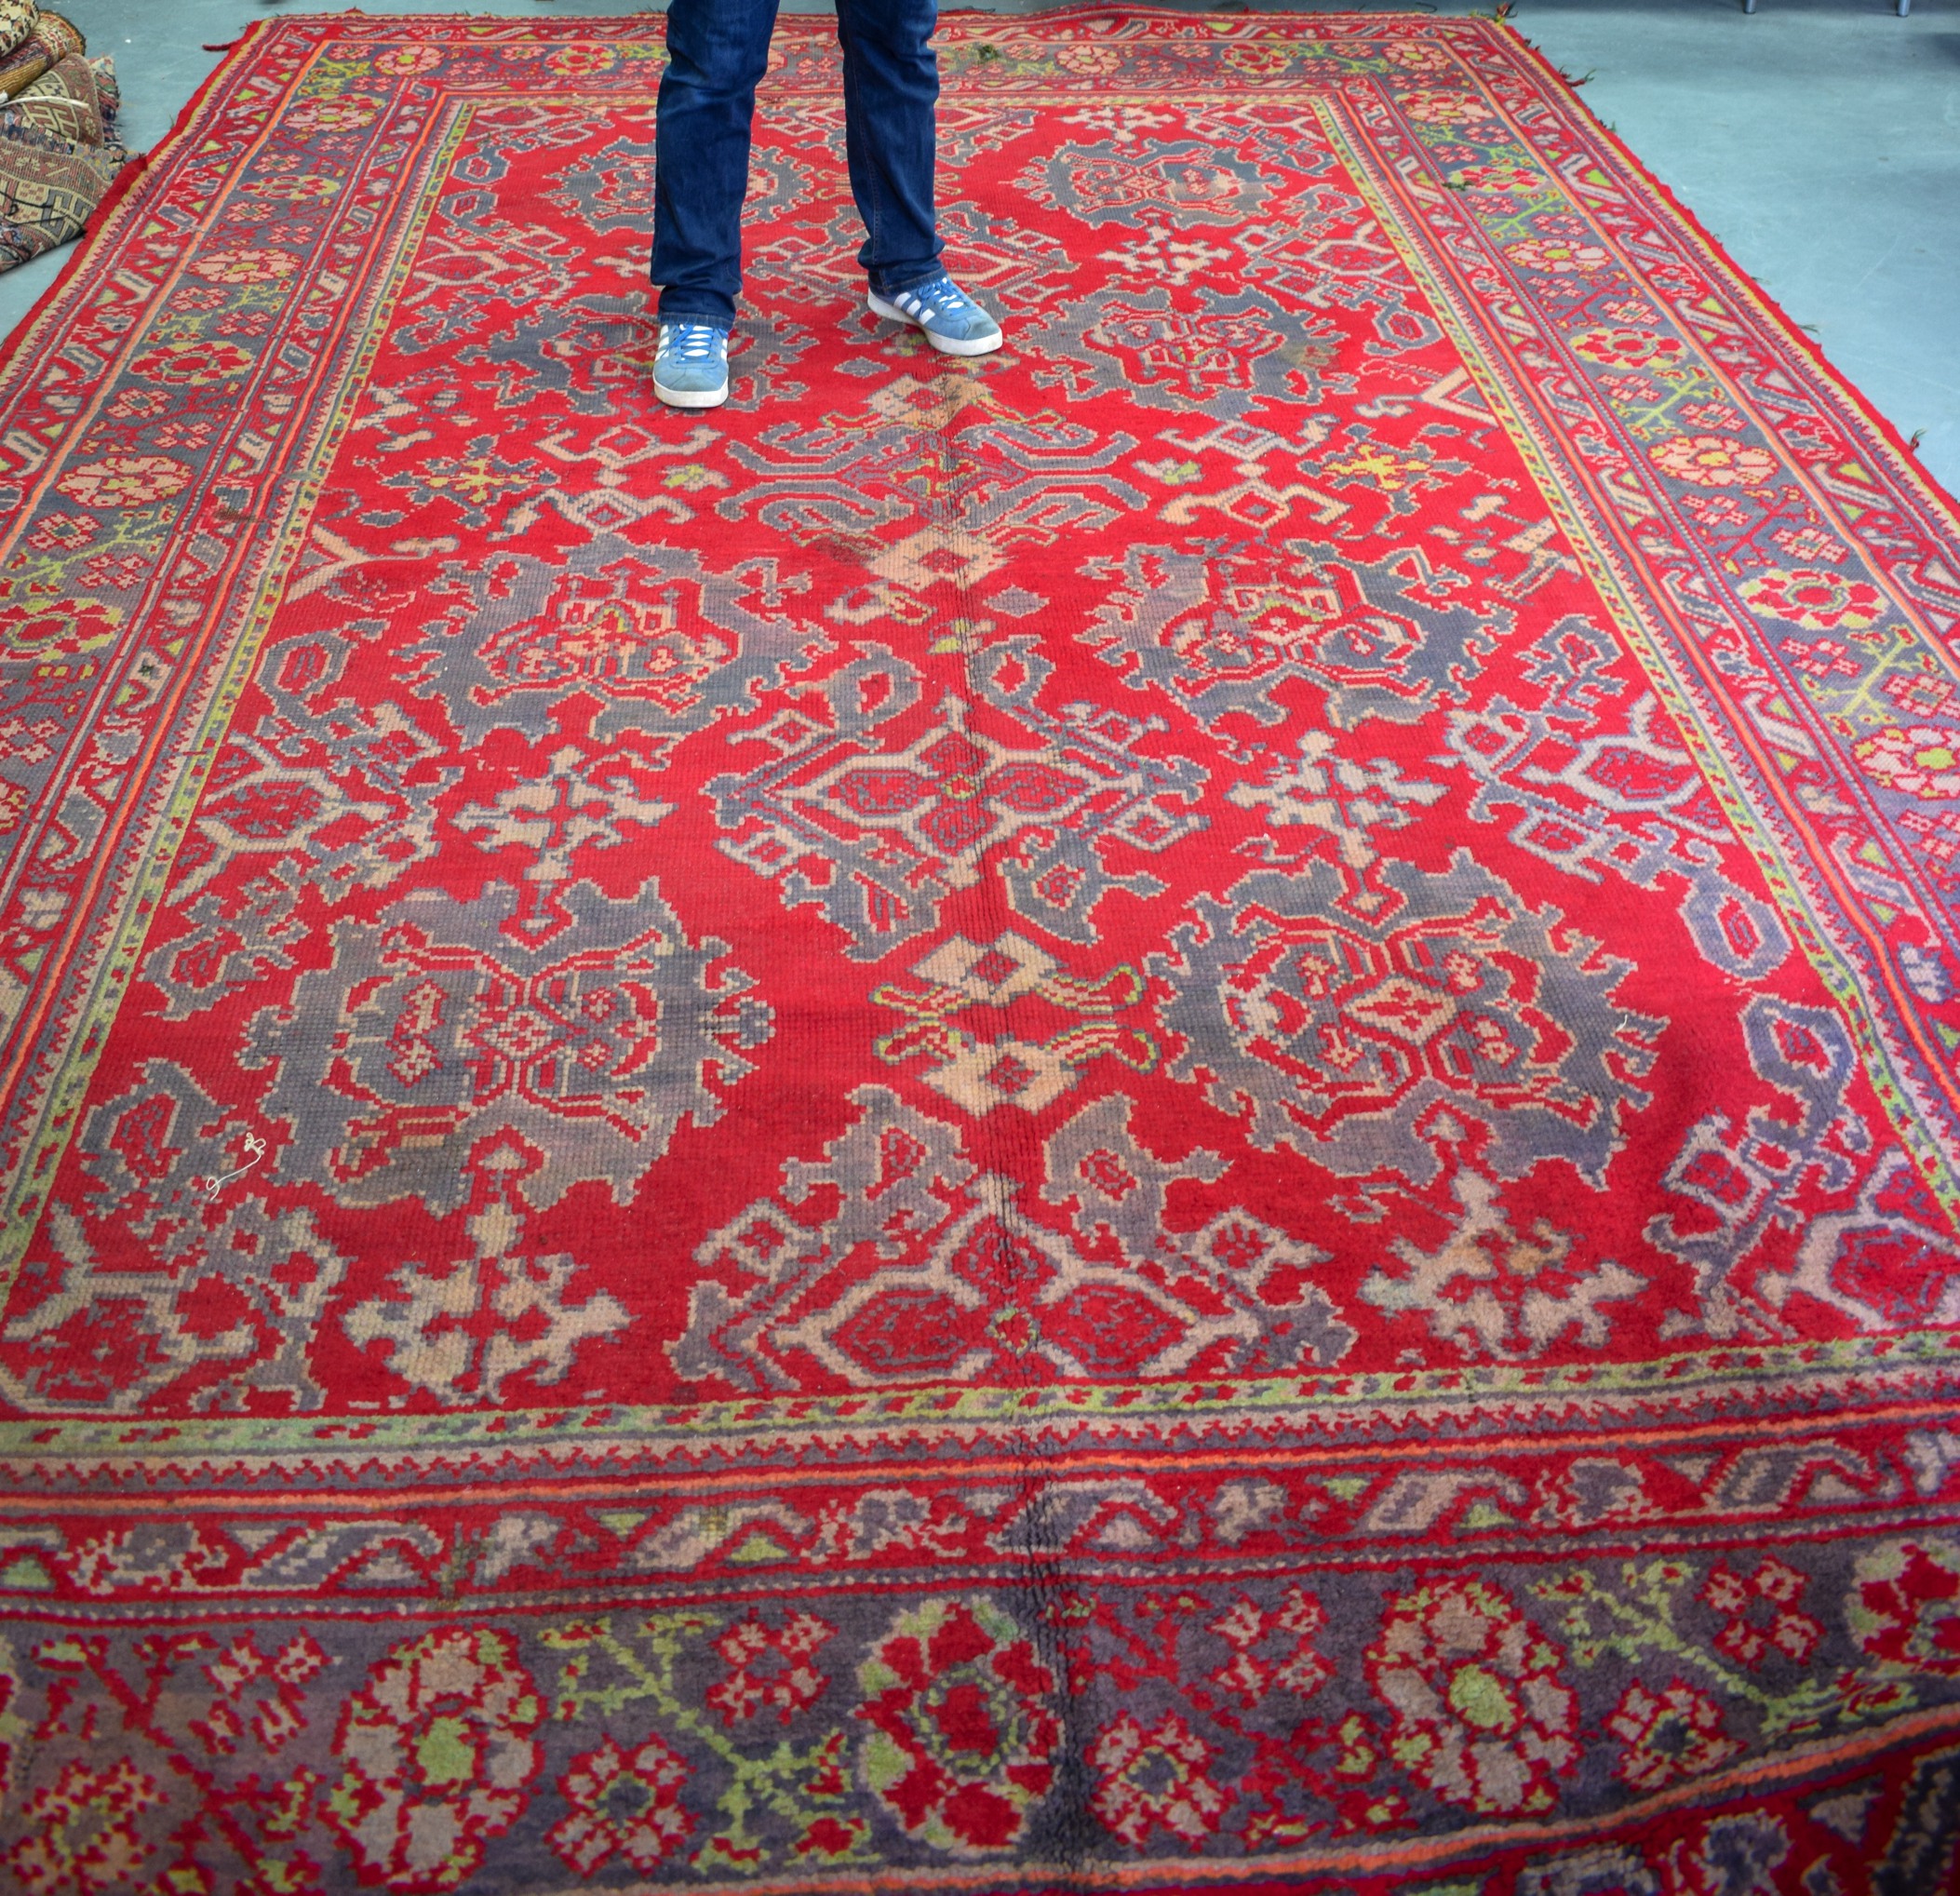 A HUGE RED GROUND PERSIAN RUG, decorated with foliage. 427 cm x 278 cm. - Image 2 of 5